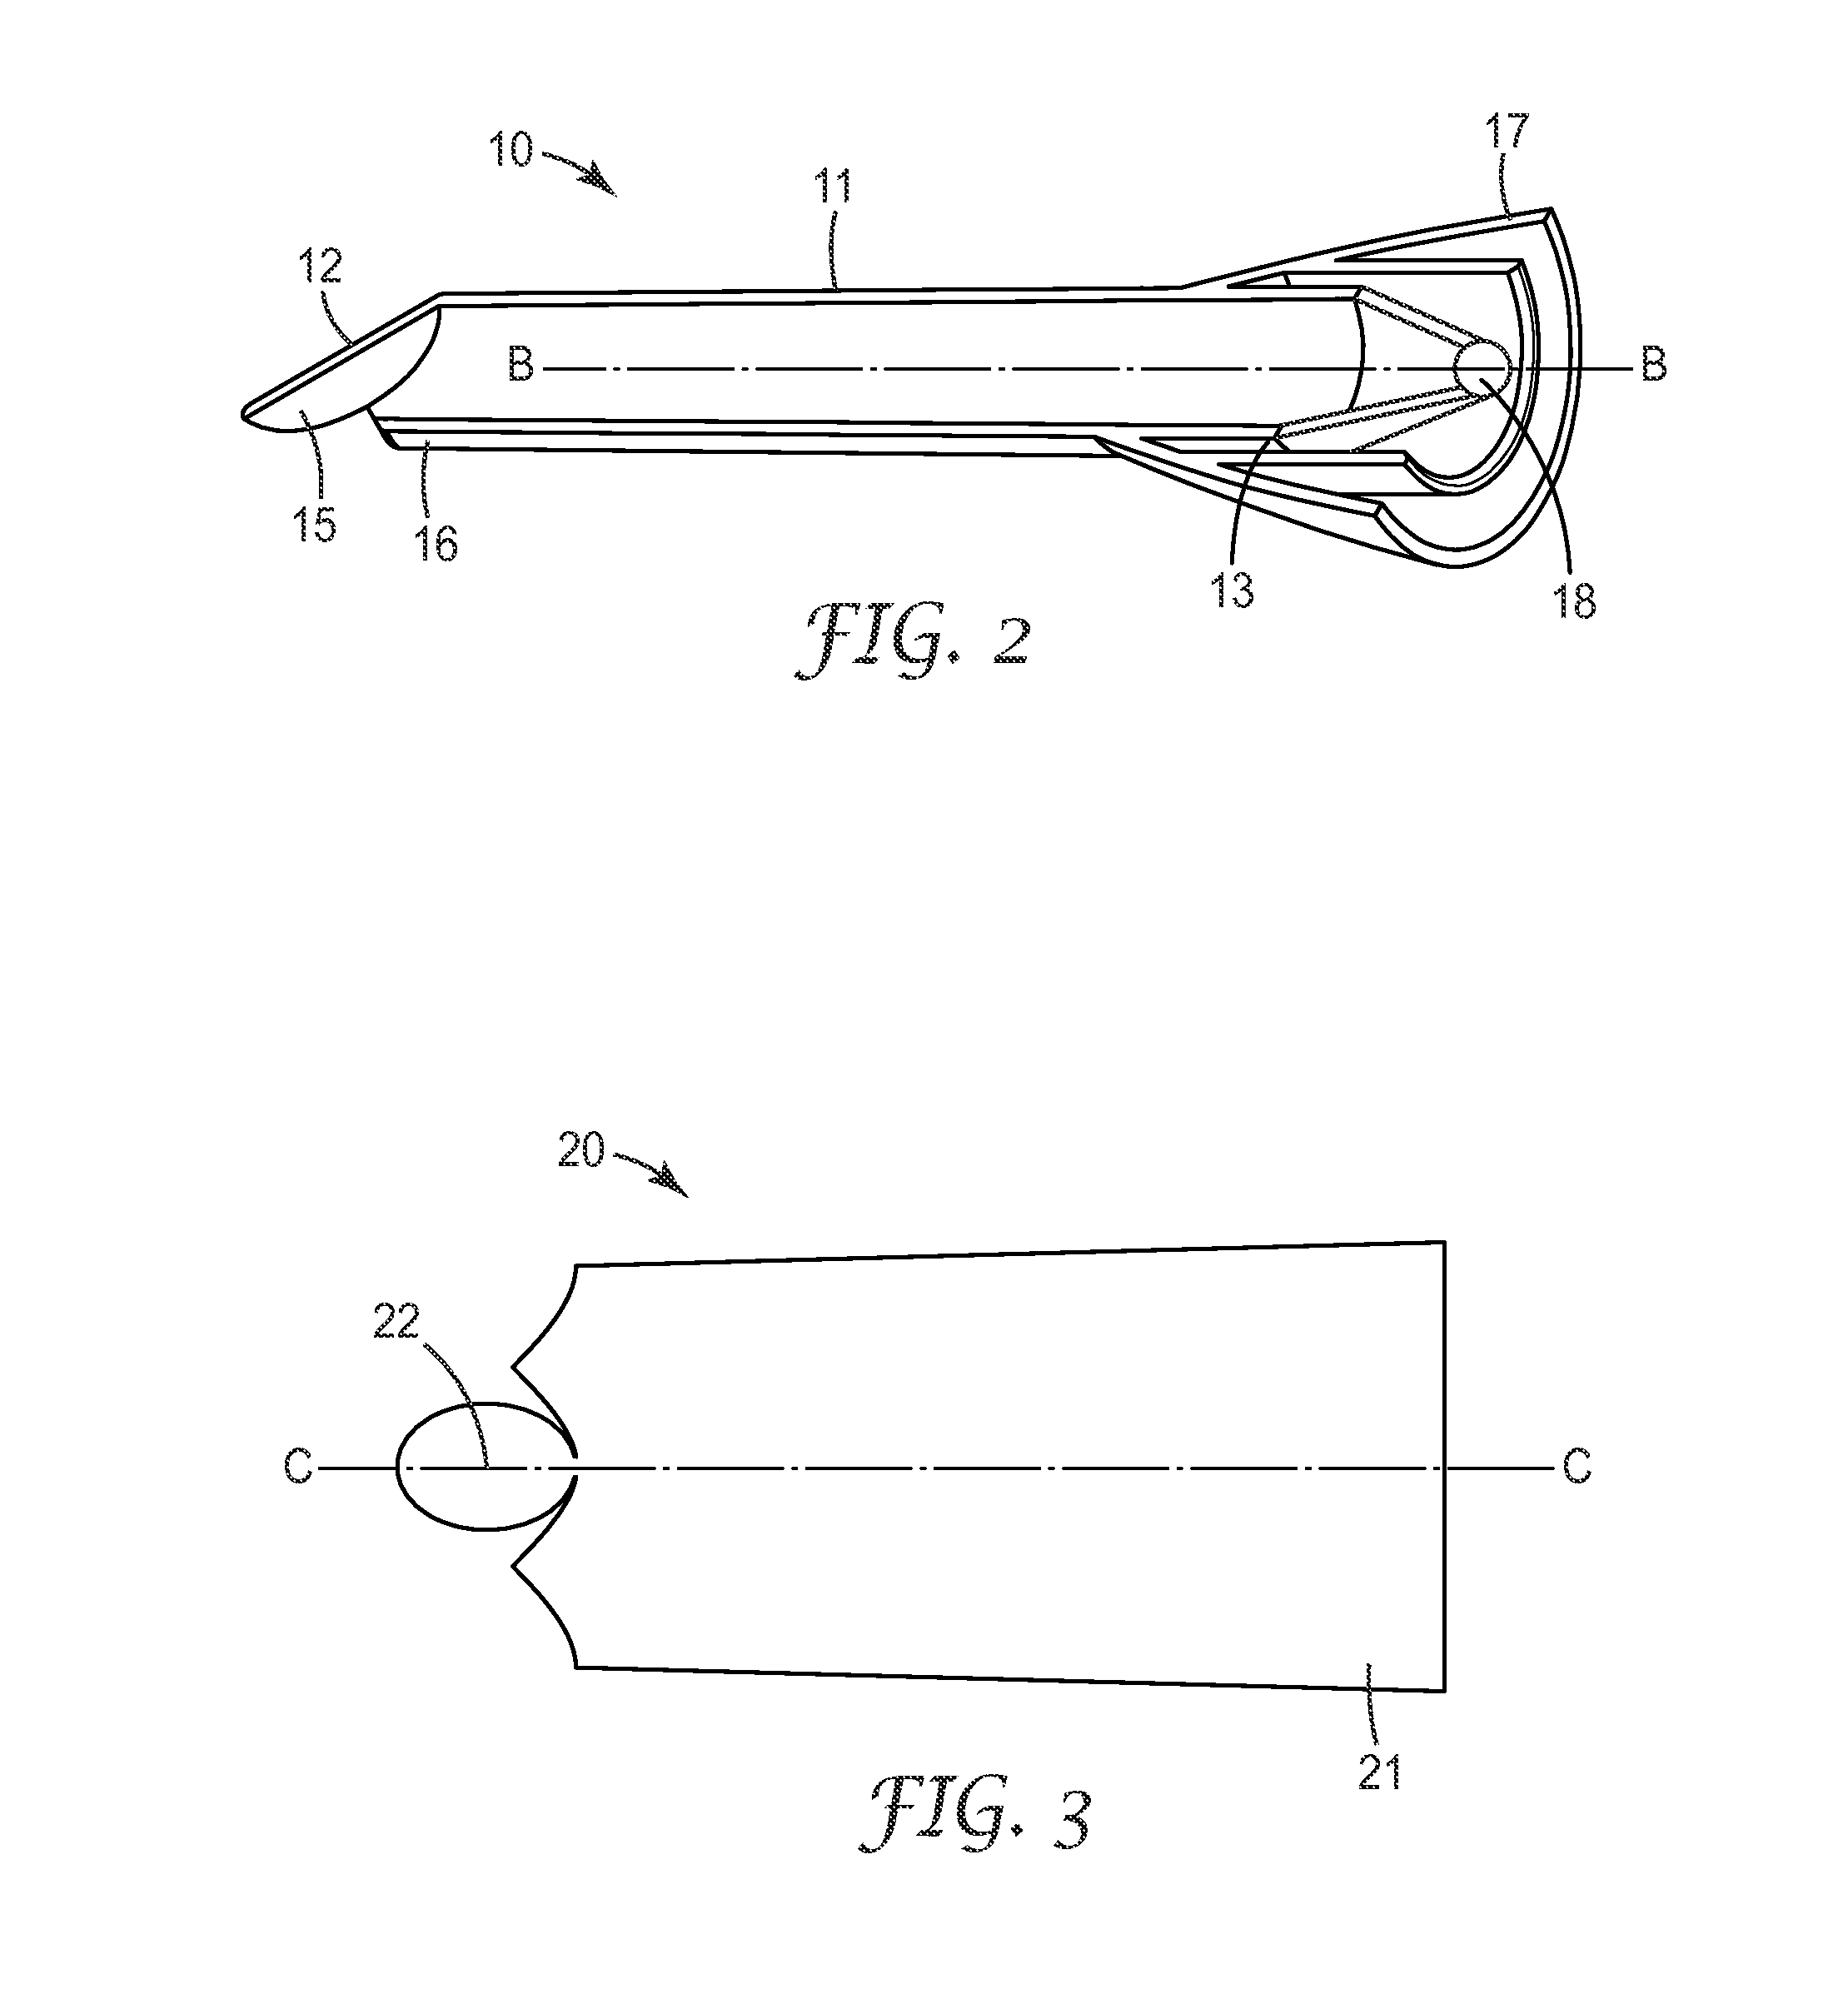 Light guide for a dental light device and a method of making the light guide